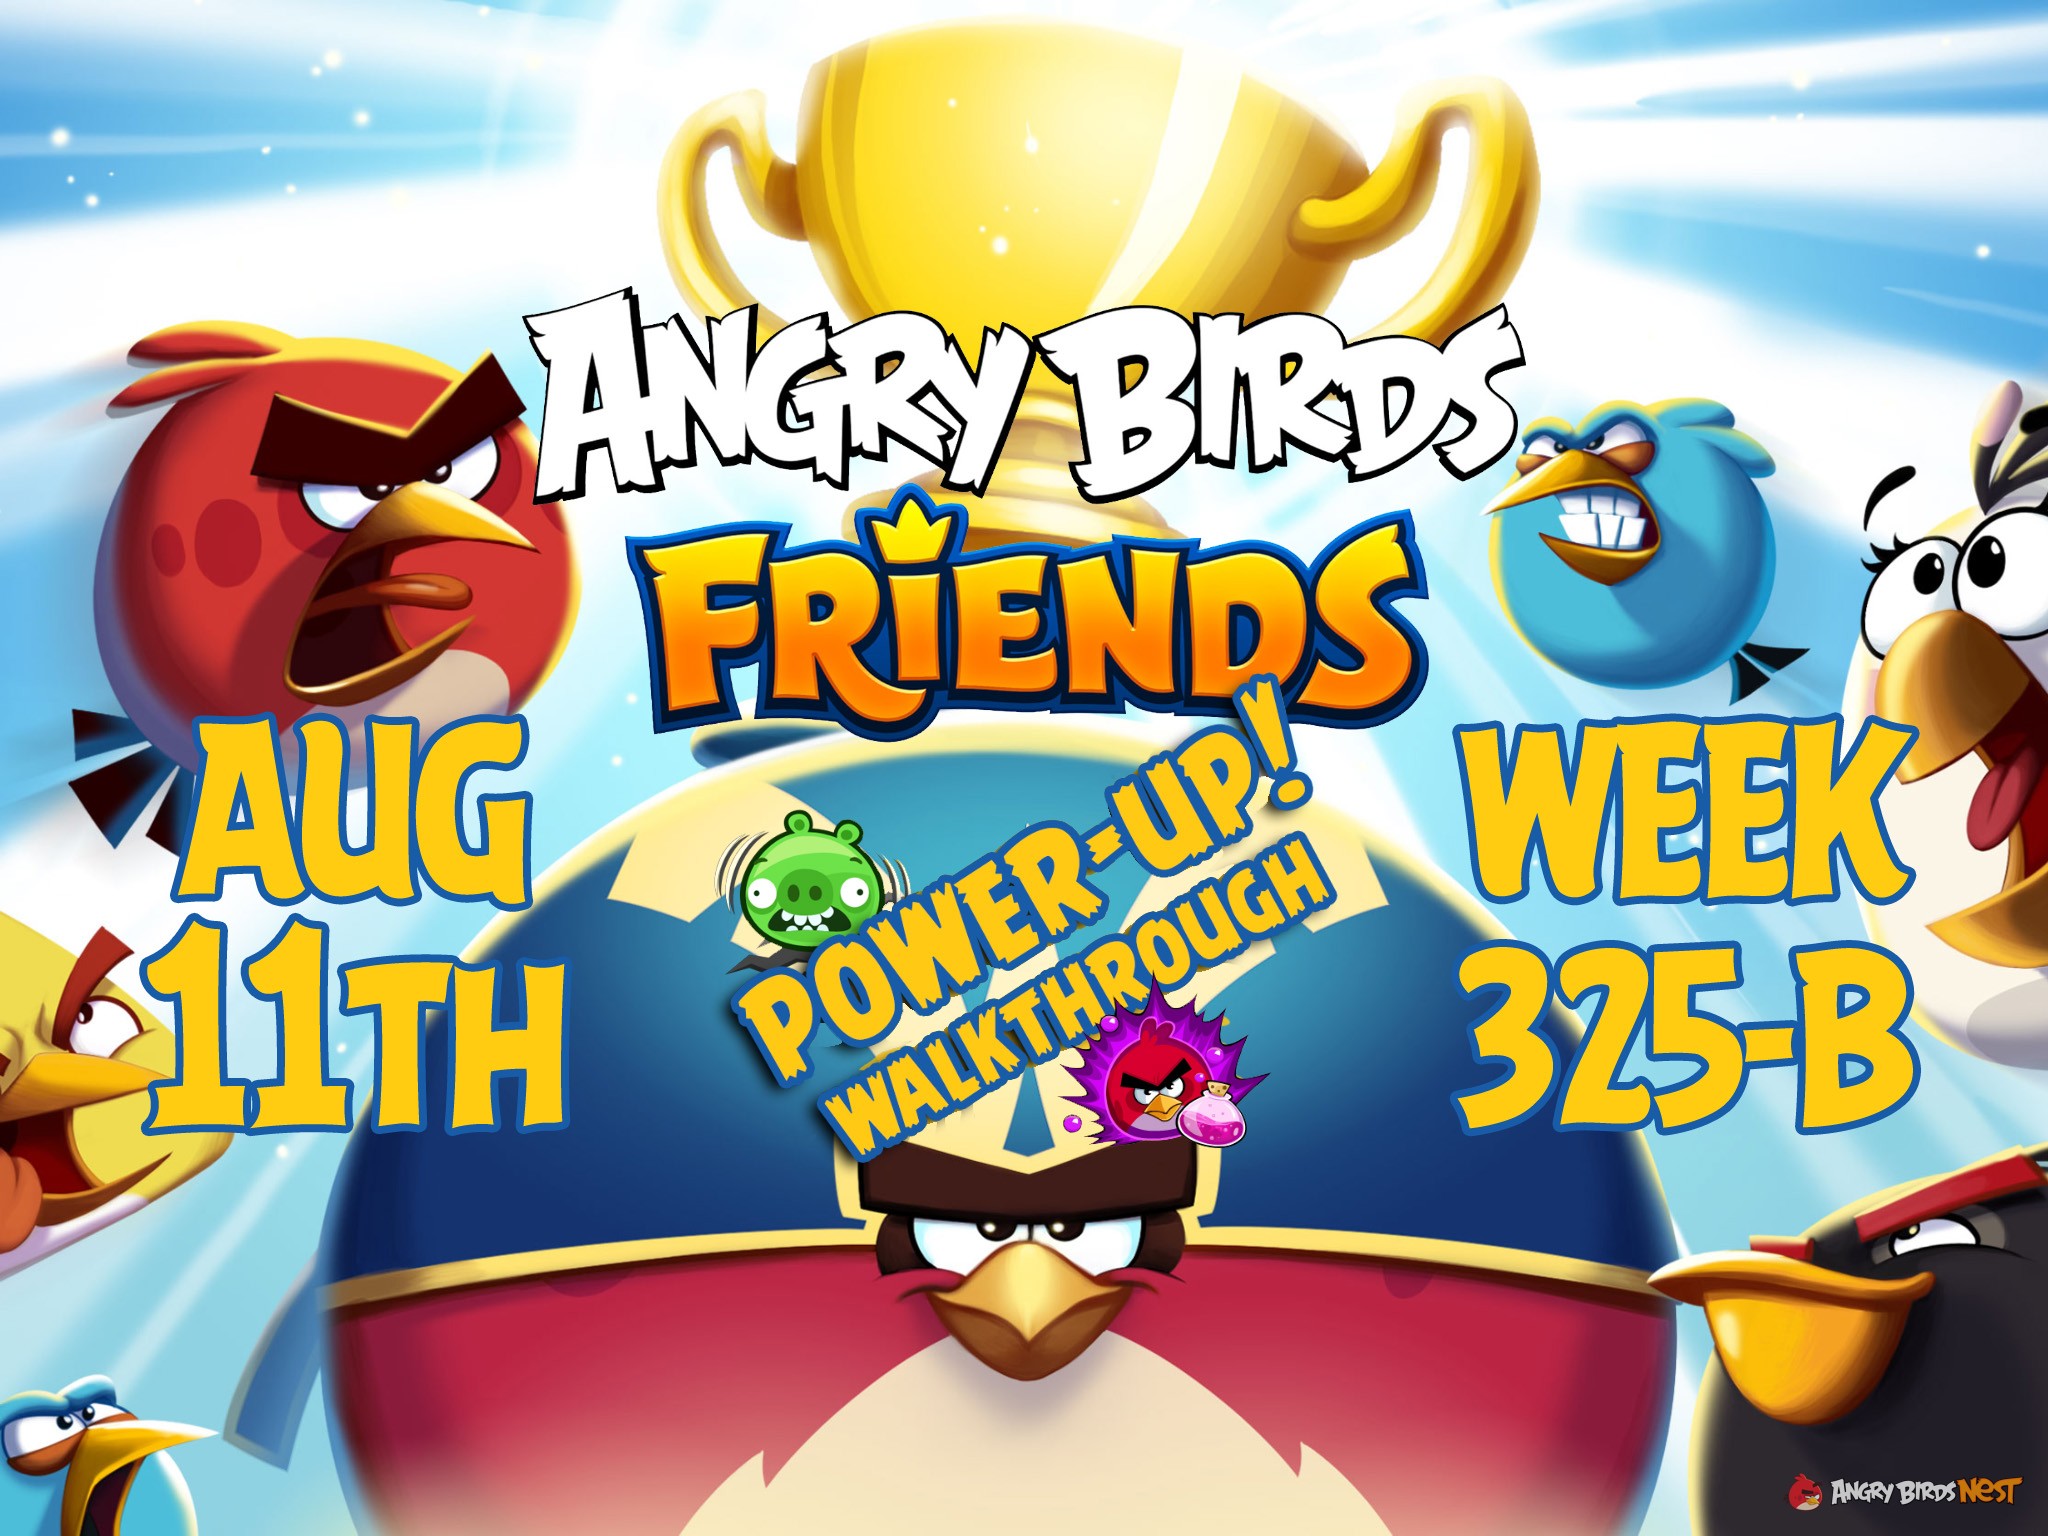 Angry-Birds-Friends-Tournament-Week-325-B-Feature-Image-PU